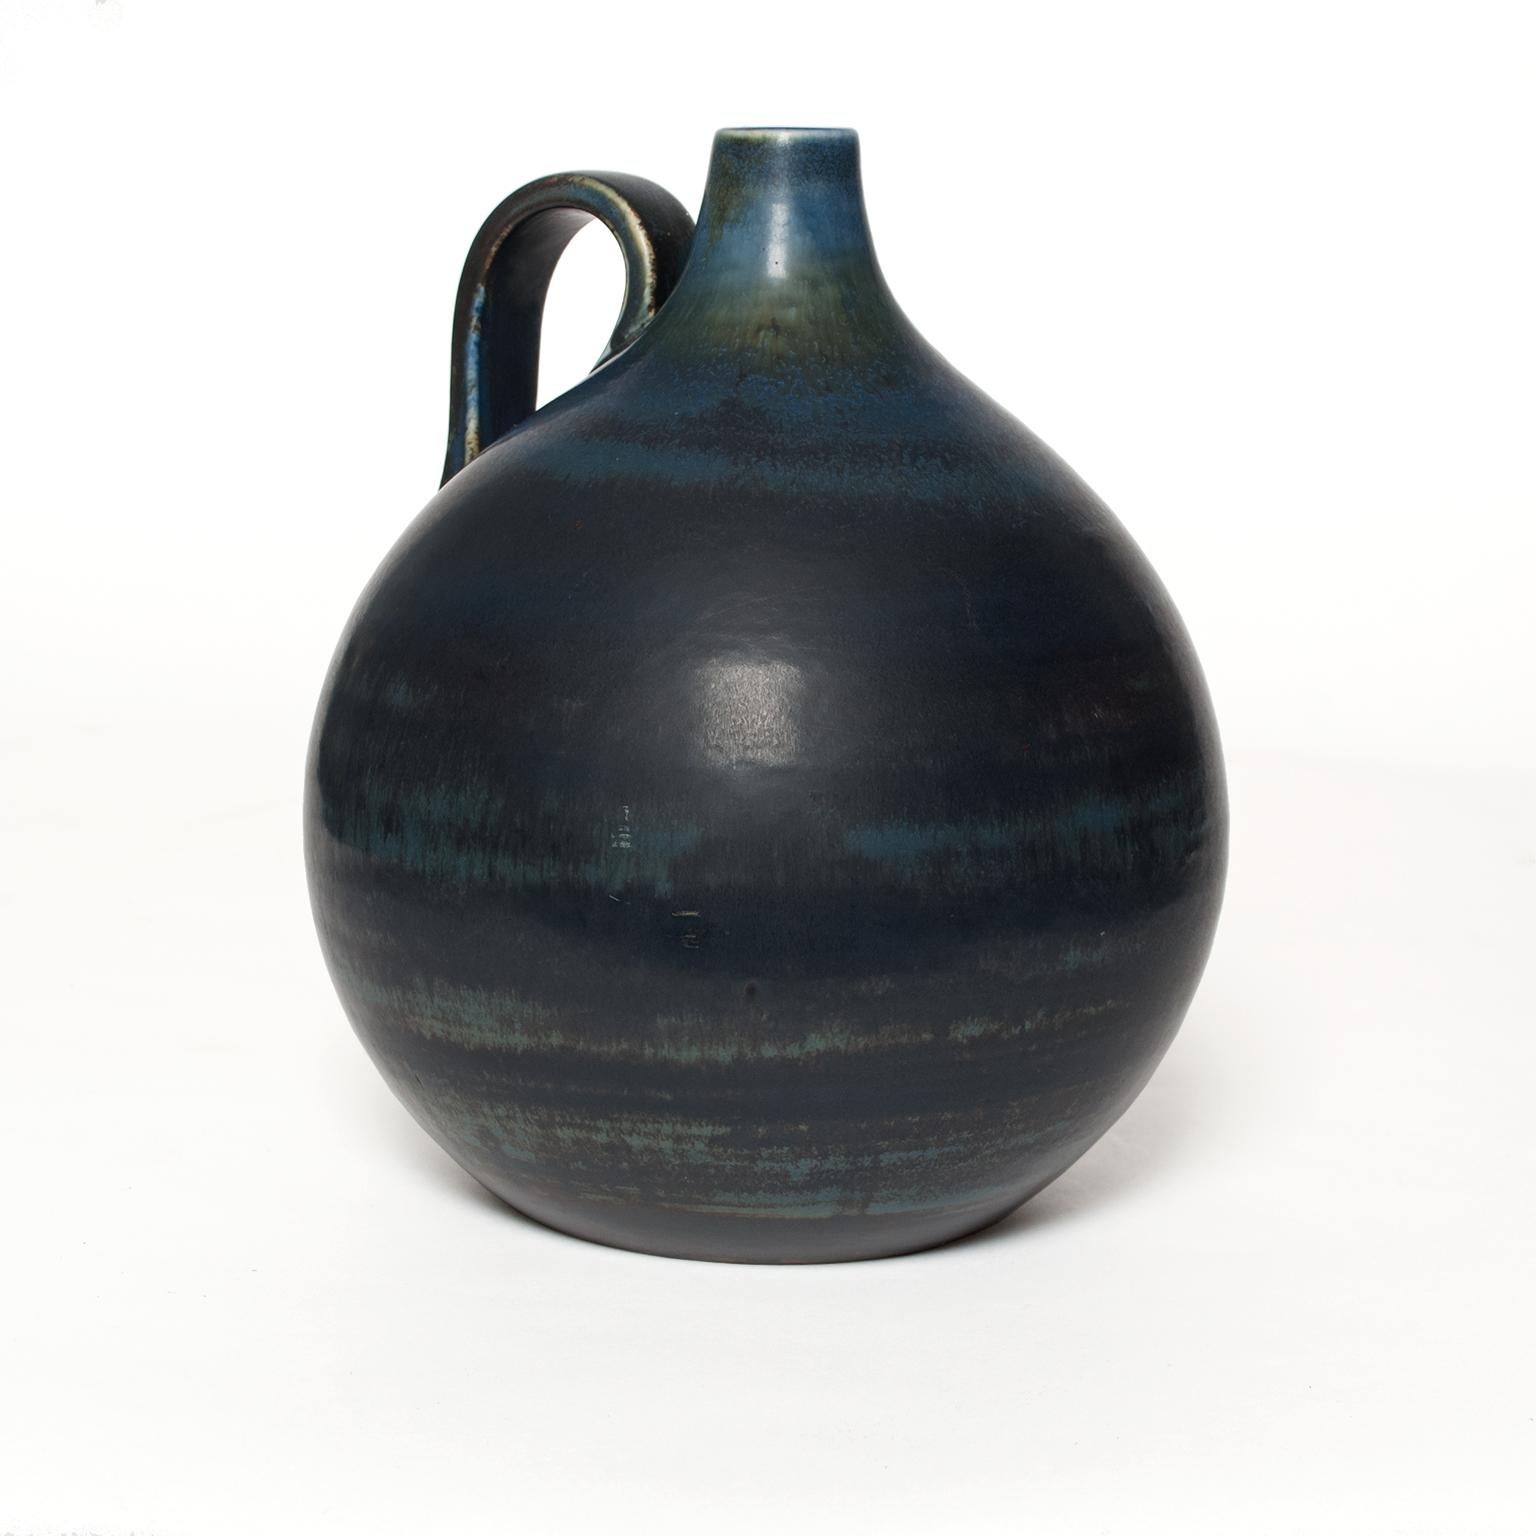 A unique Swedish art deco ceramic vessel with handle finished in a range of medium to deep blues. Made by Gertrud Lonegren for Rorstrand.
Measures: Height 10